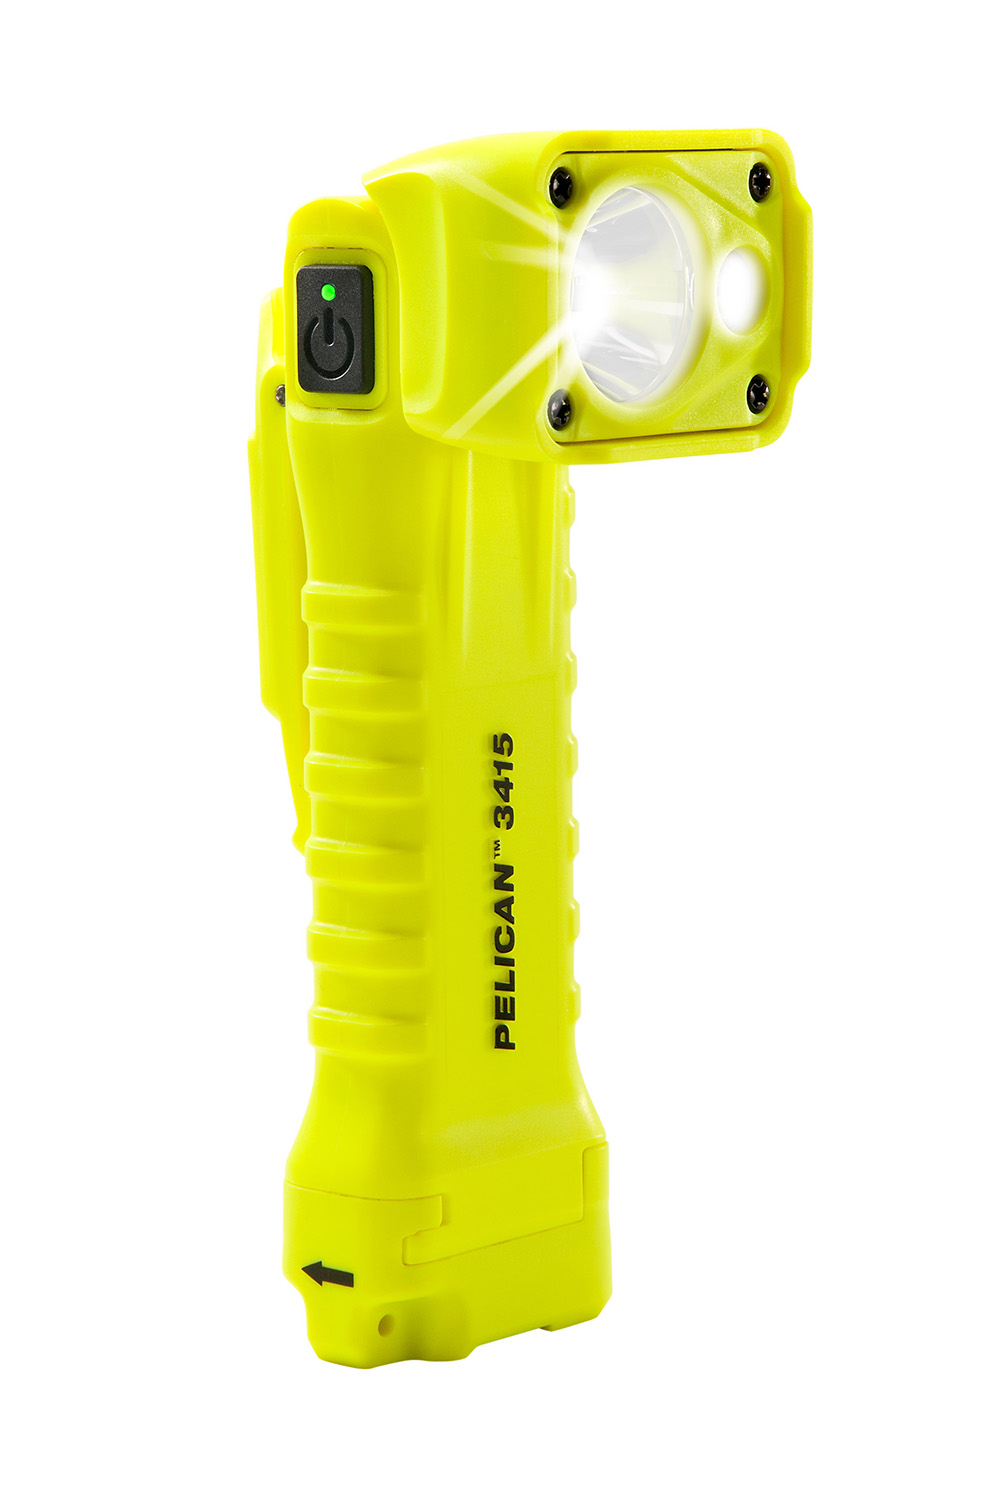 Pelican Products articulating flashlight (Model No. 3415)